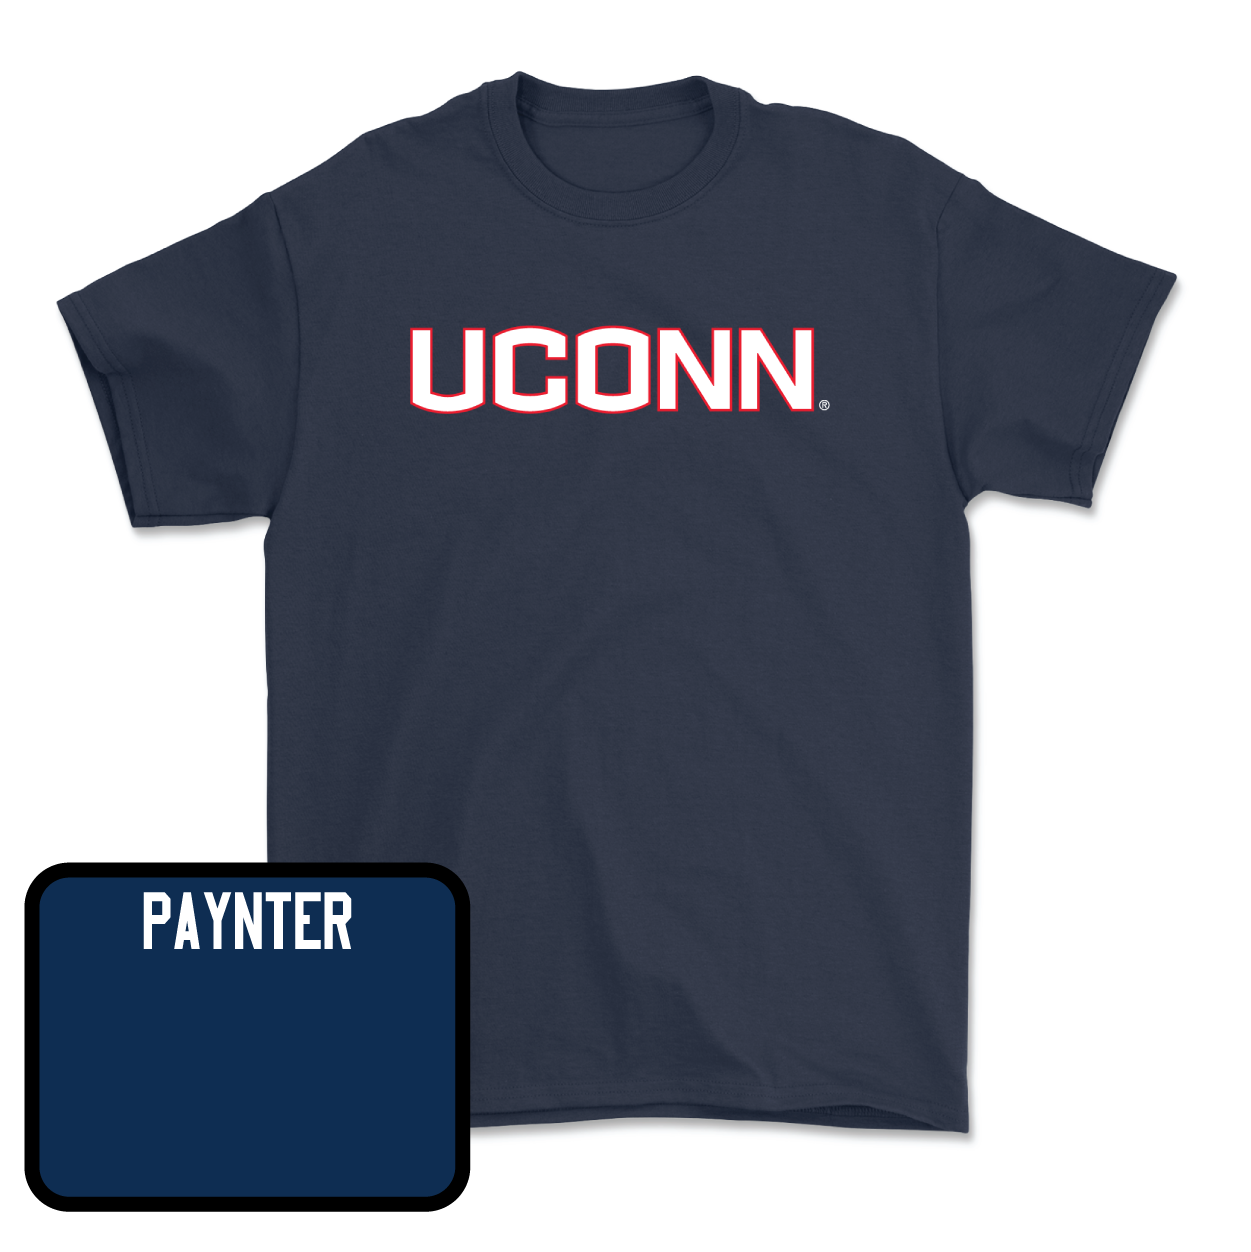 Navy Women's Rowing UConn Tee Youth Small / Emma Paynter